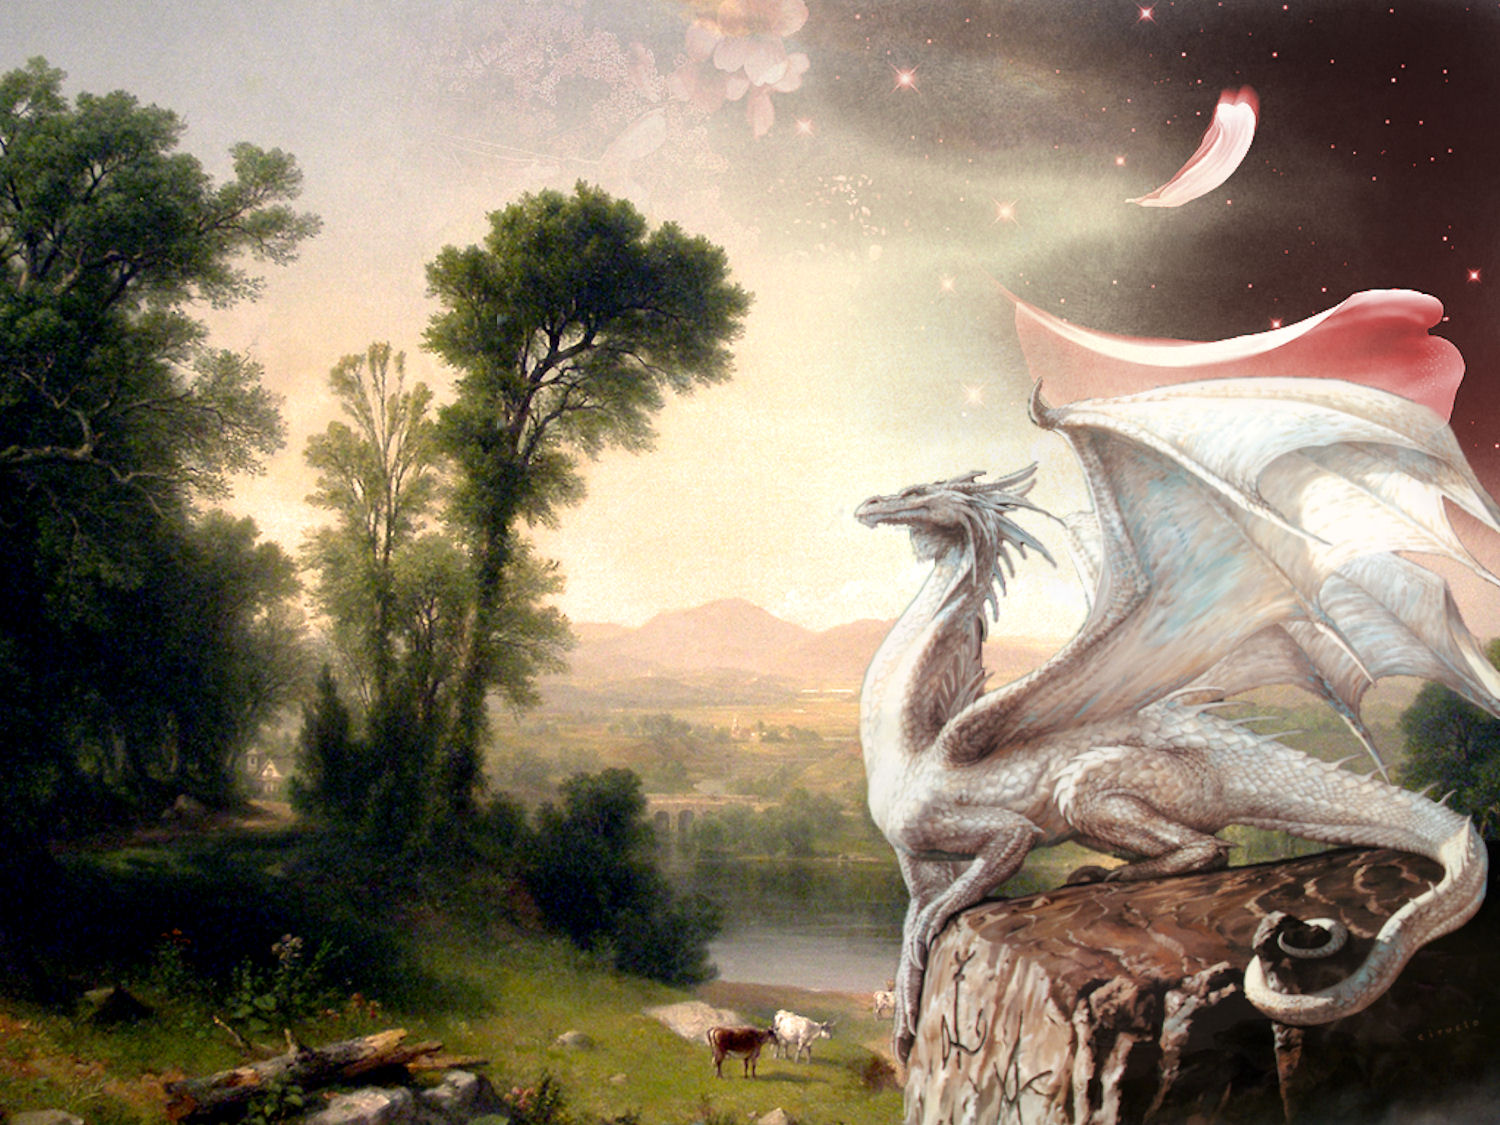 Fantasy White Dragon Wallpaper Image Amp Pictures Becuo